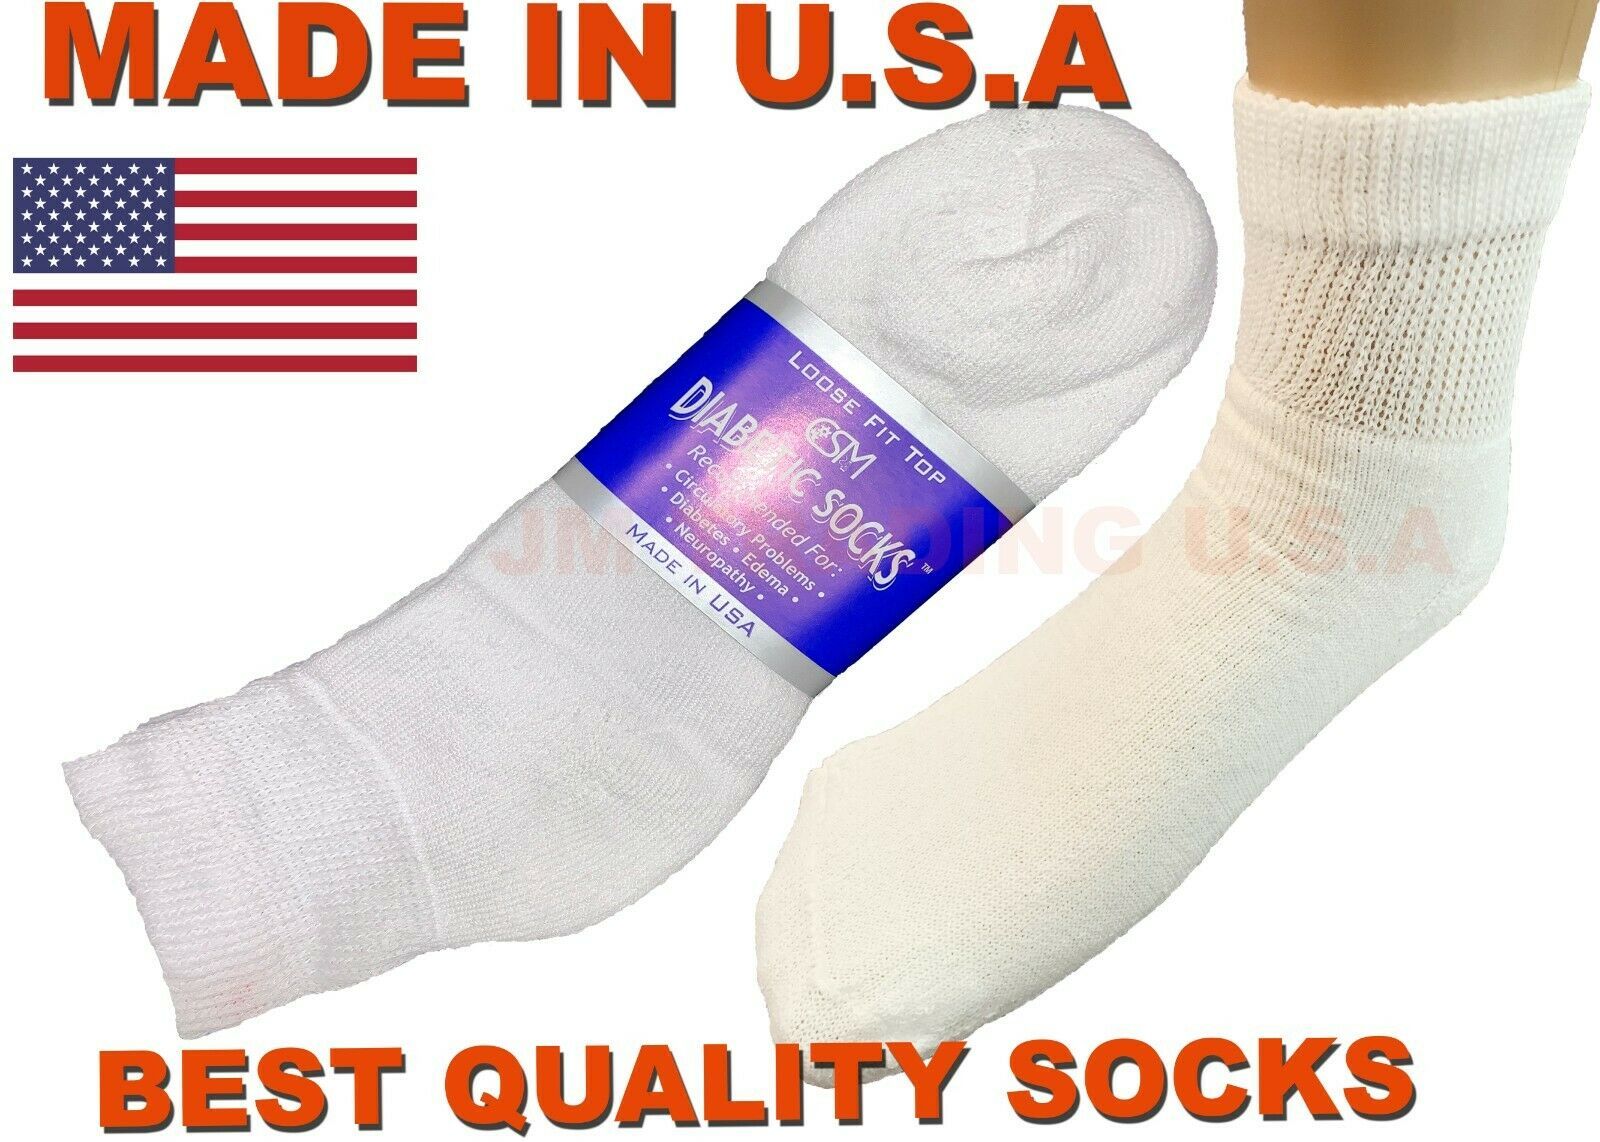 Best quality 3 pair of mens white diabetic ankle socks 10-13 size MADE IN USA